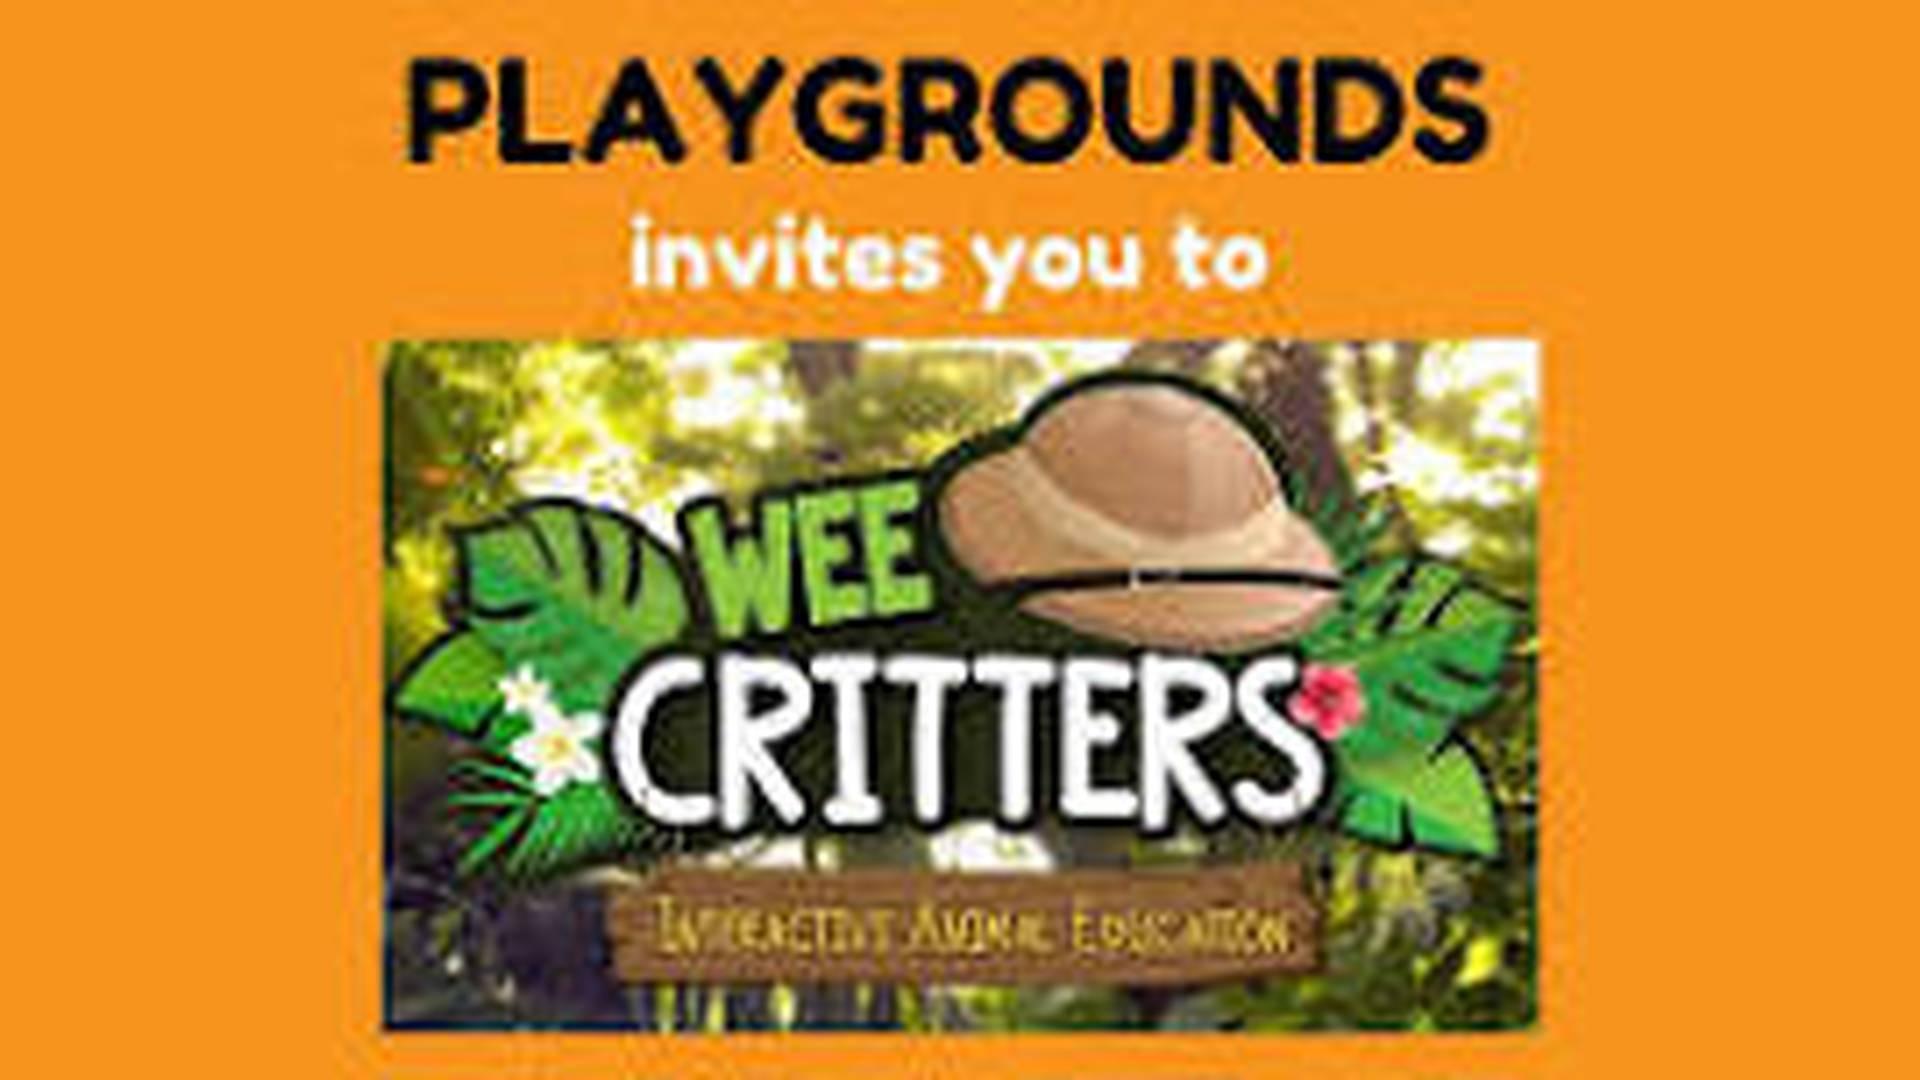 Wee Critters come to Playgrounds! photo